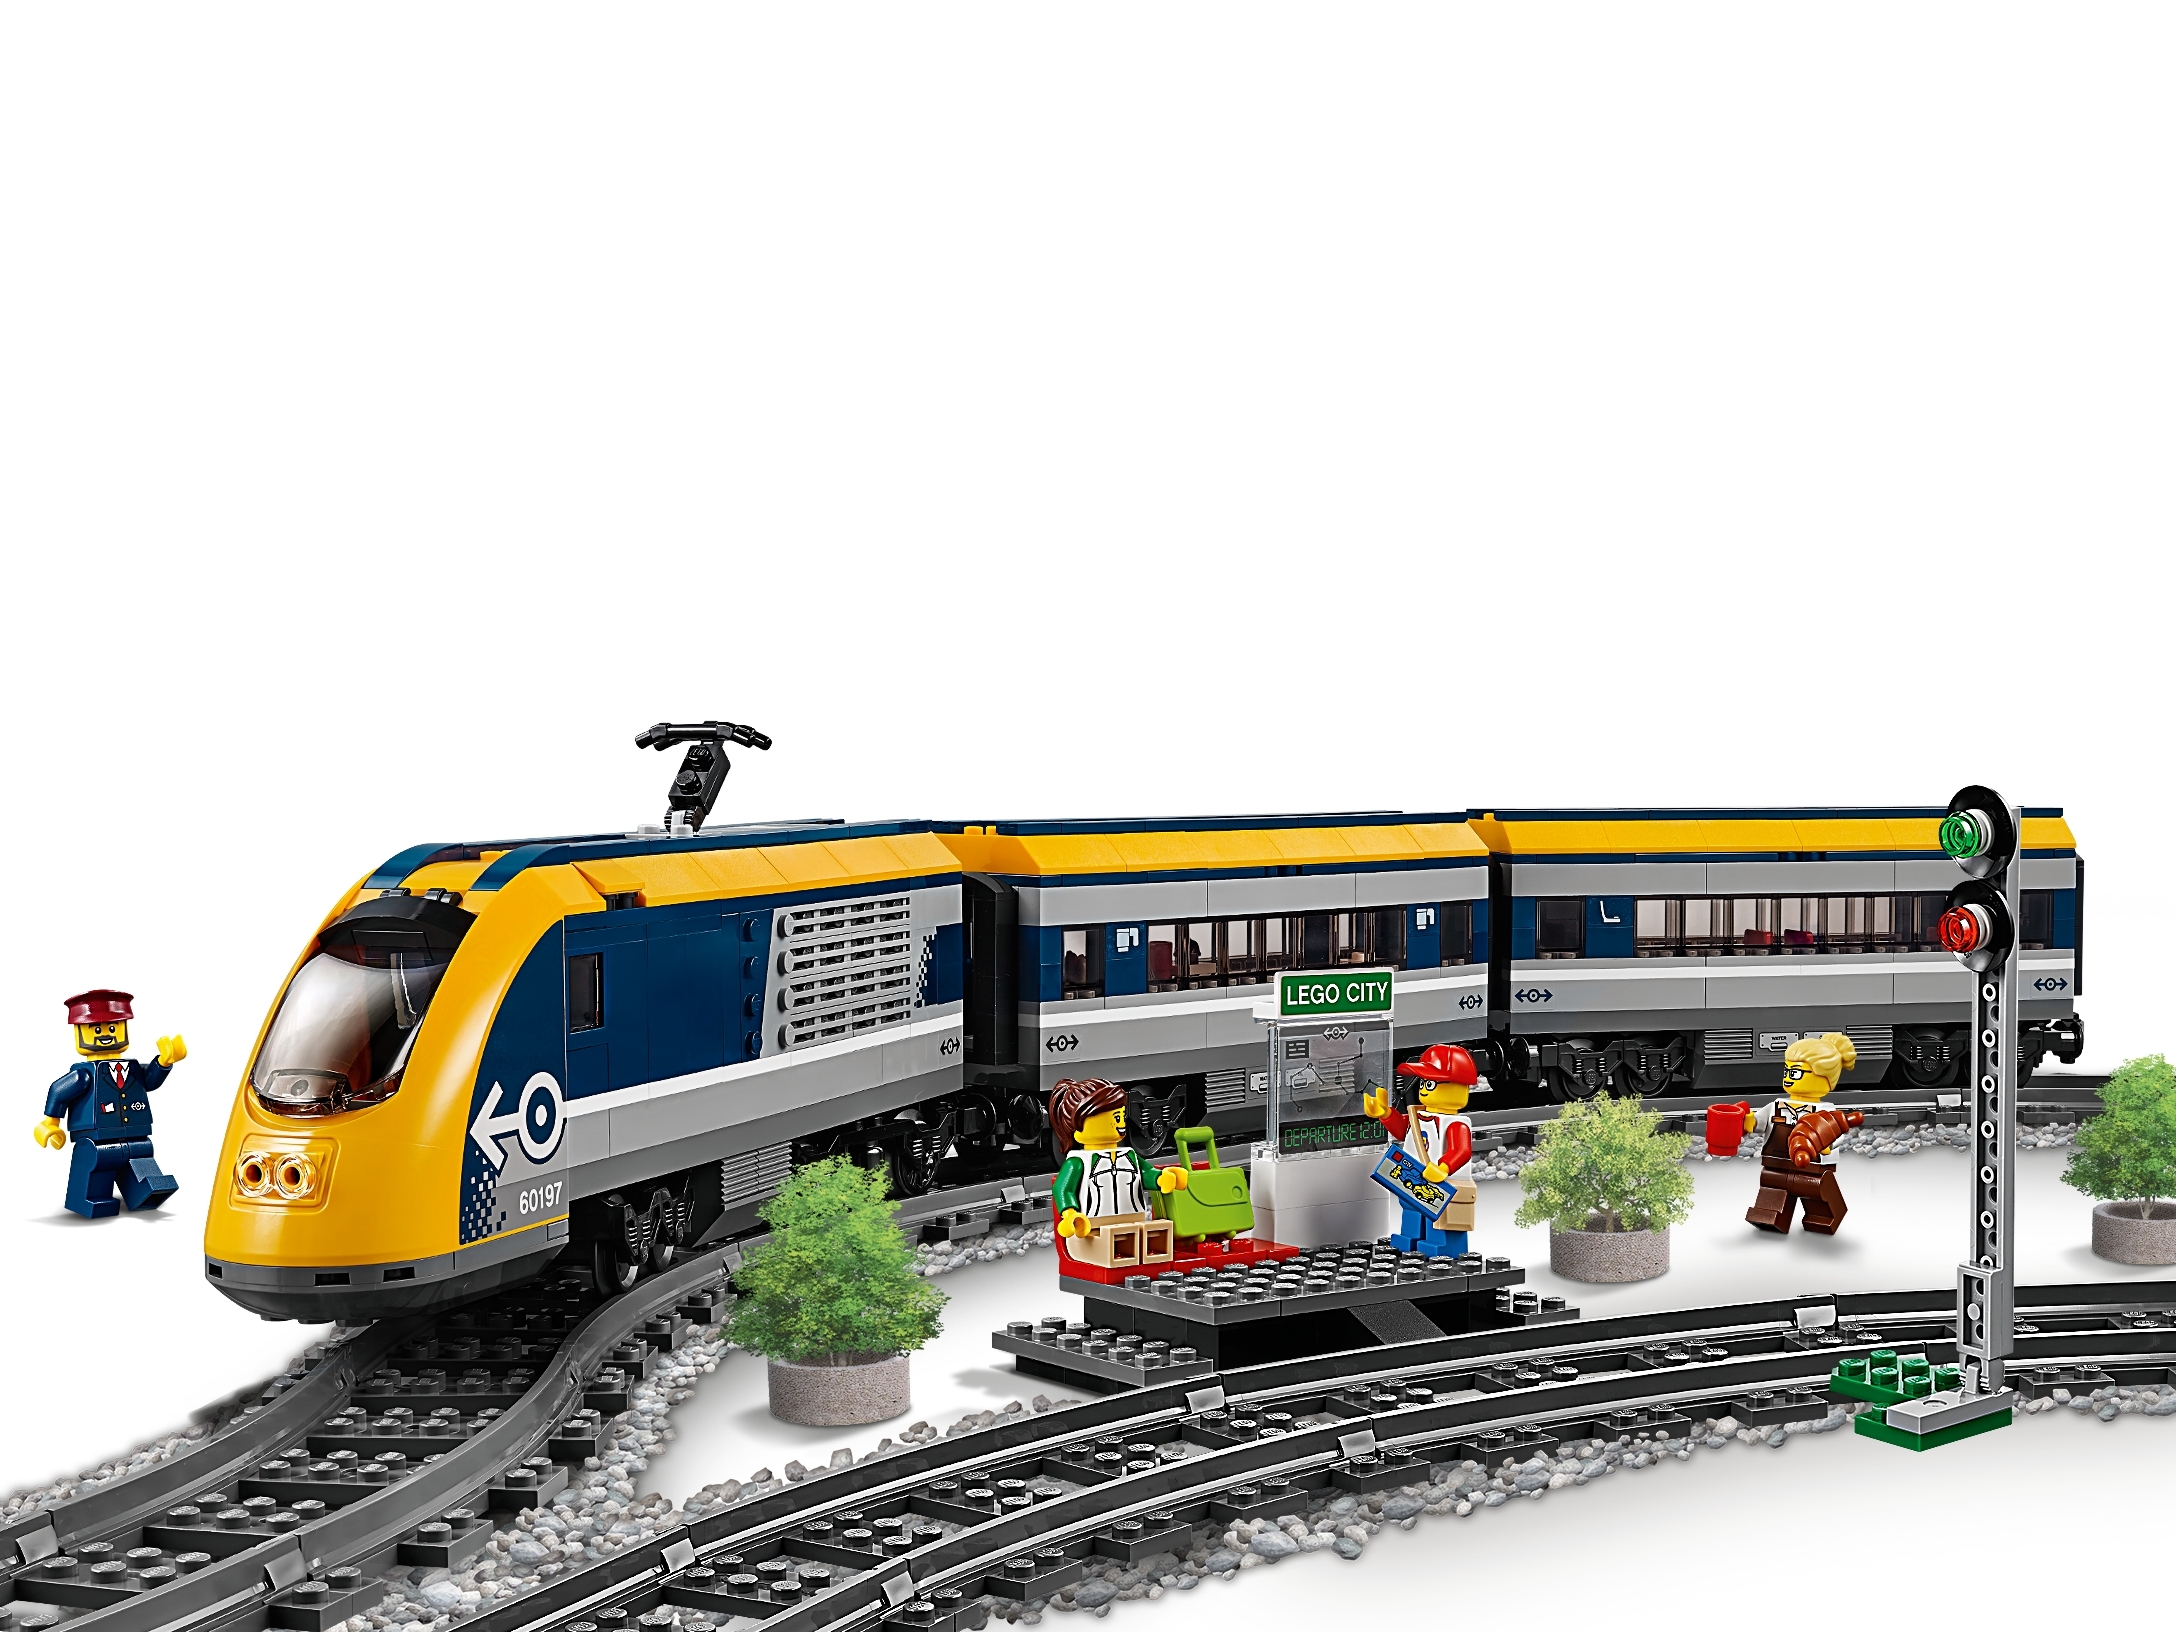 Lego City Passenger Carriage Train Railway seating car from 60197 New genuine 